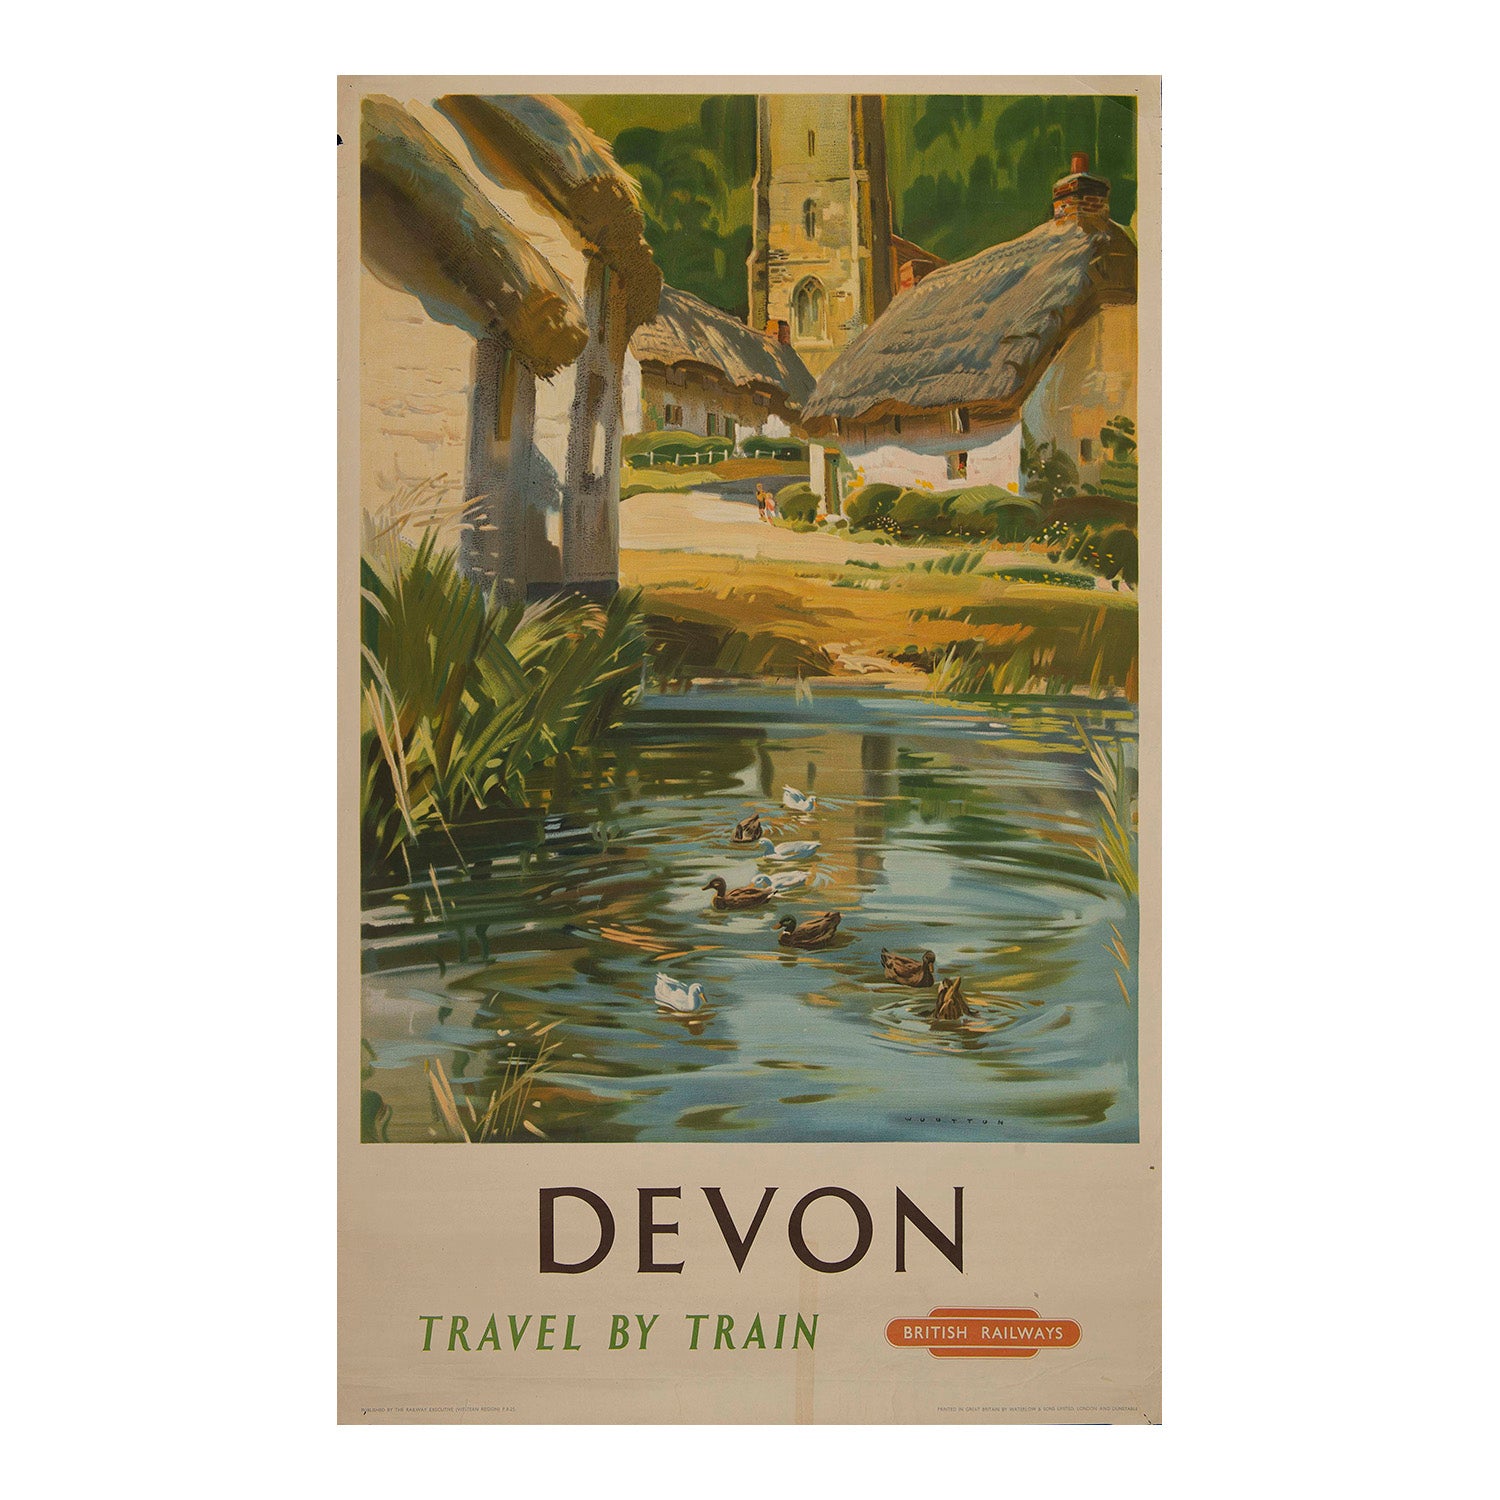 railway poster, Devon, Travel by Train, painted by Frank Wootton and published by the Railway Executive (Western Region) in about 1950. The charming image depicts a Devon village of thatched cottages and a medieval church, with a duck pond in the foreground.